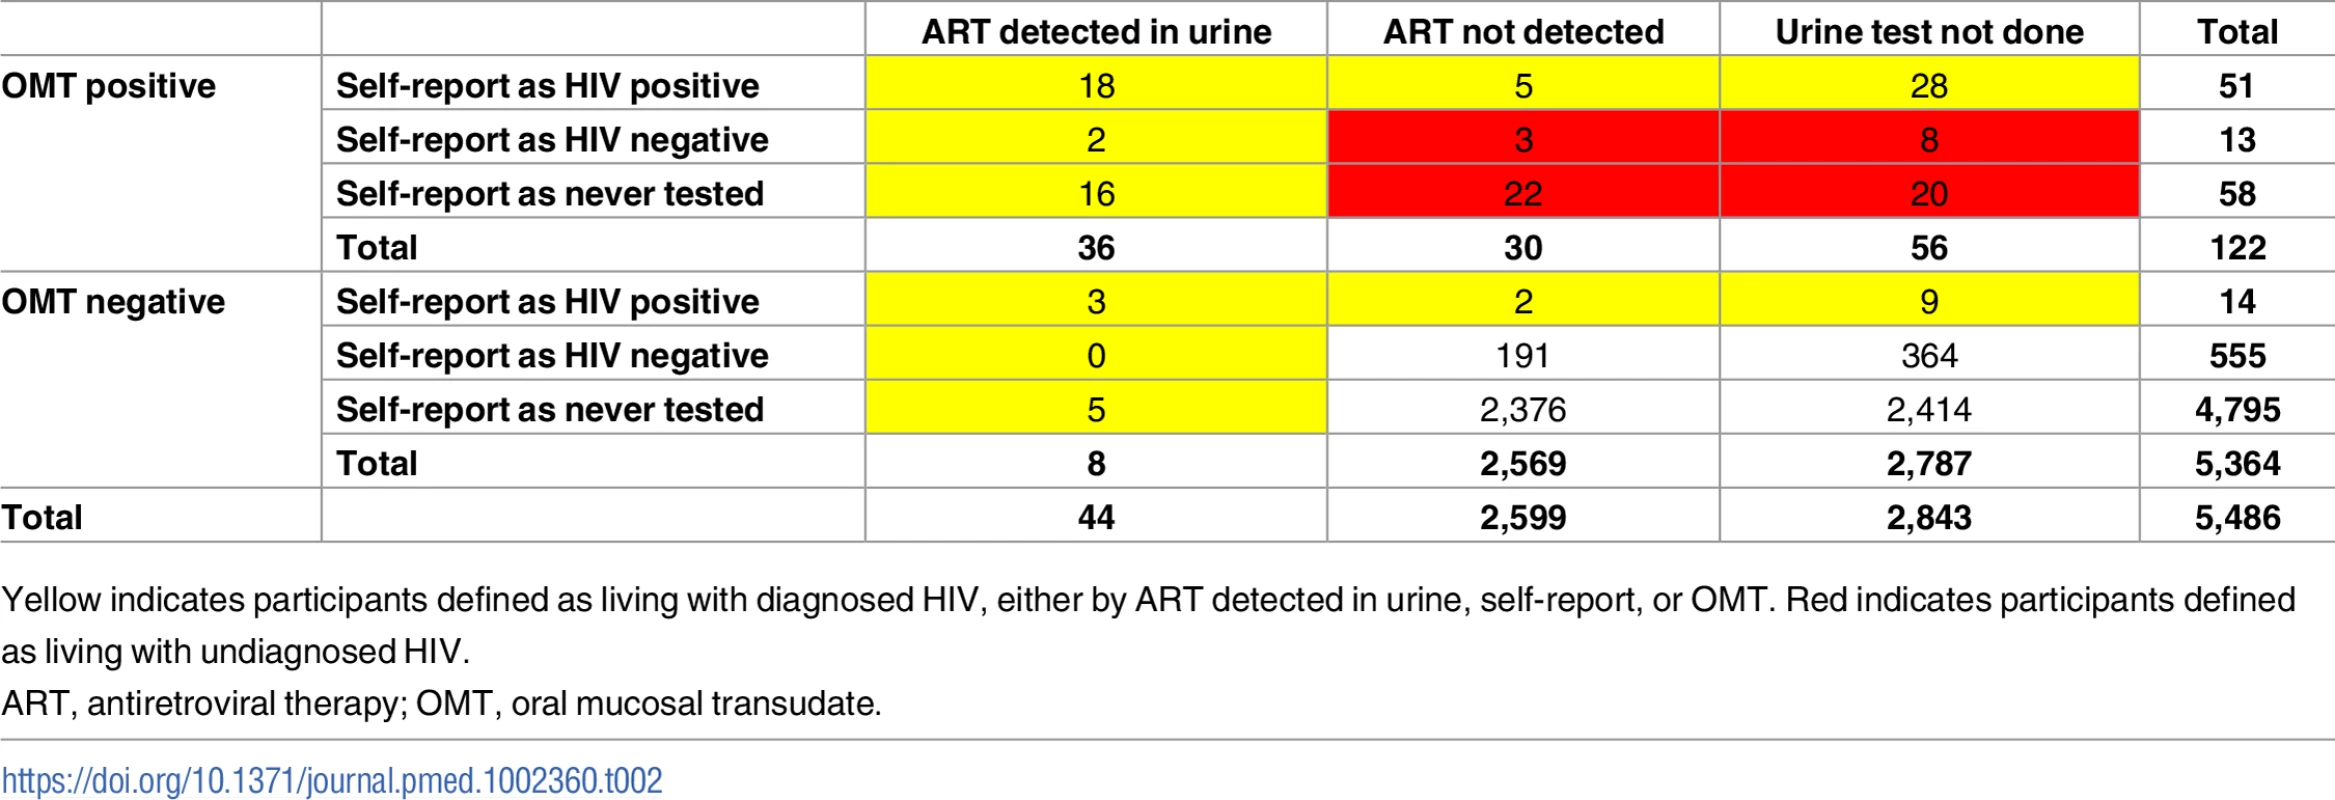 Diagnosed HIV as defined by OMT result, self-report, and urine ART result.